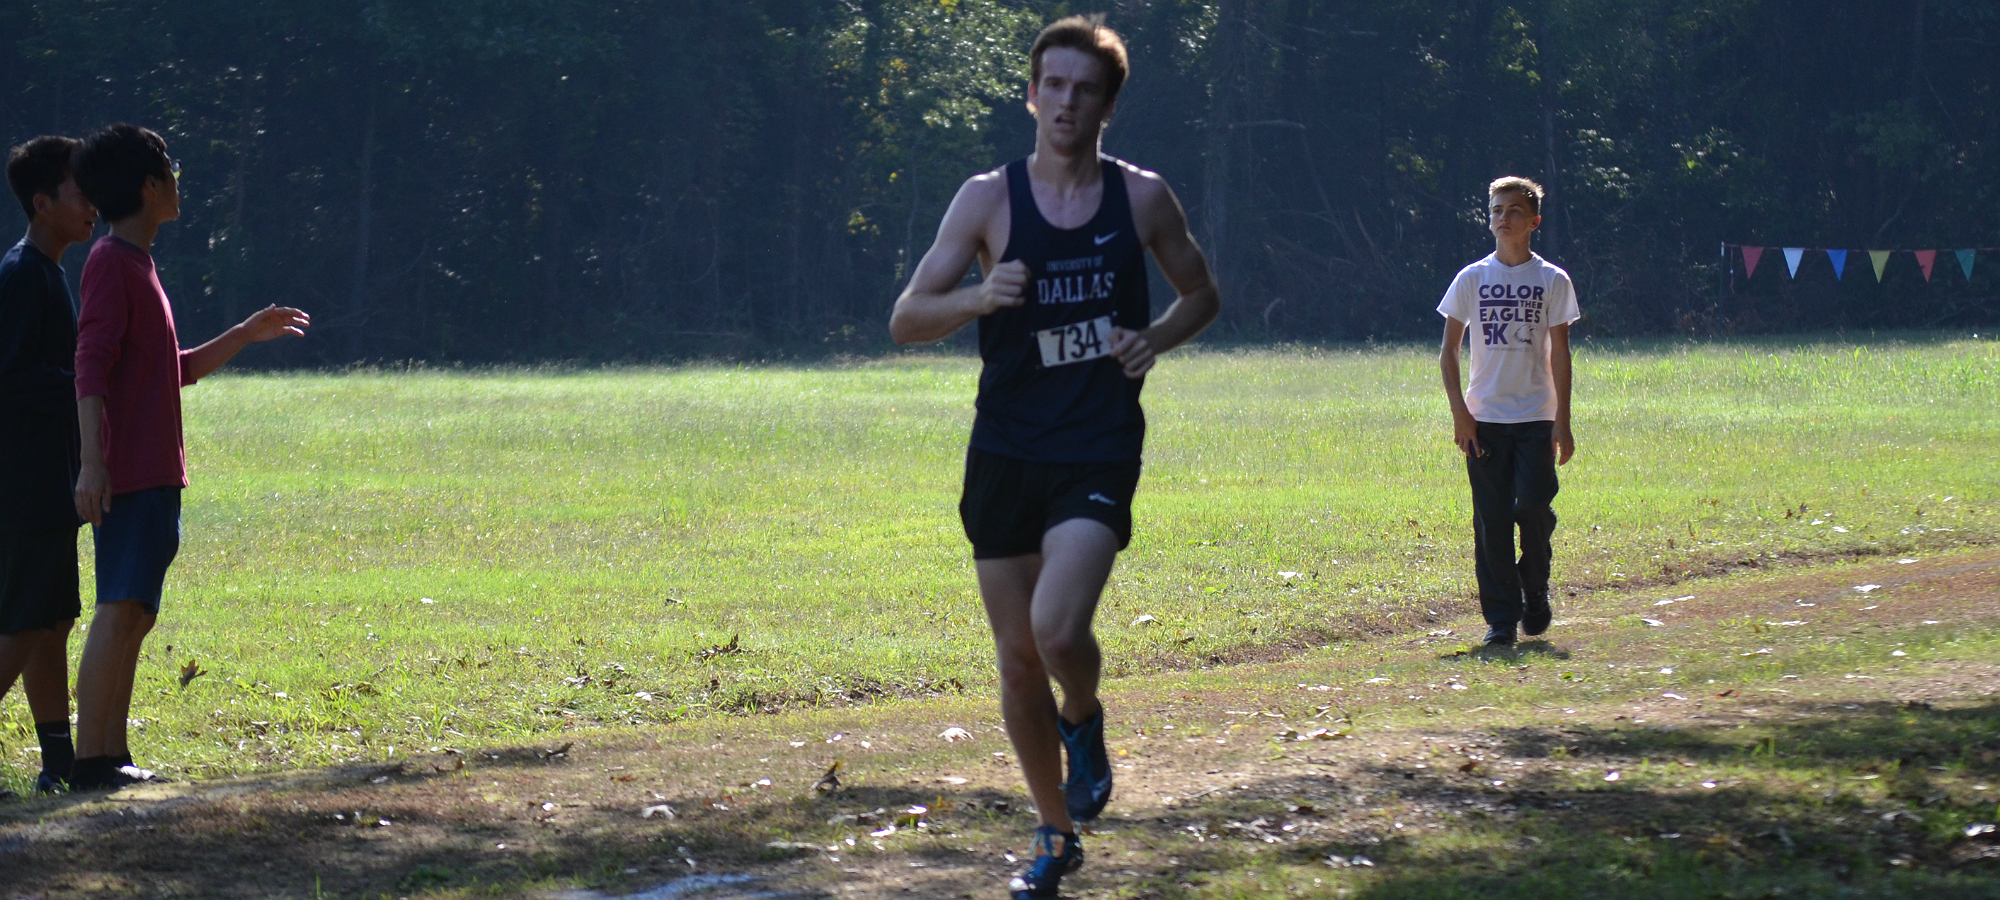 SCAC TOURNAMENT PREVIEW: Men's Cross Country Ready for Saturday